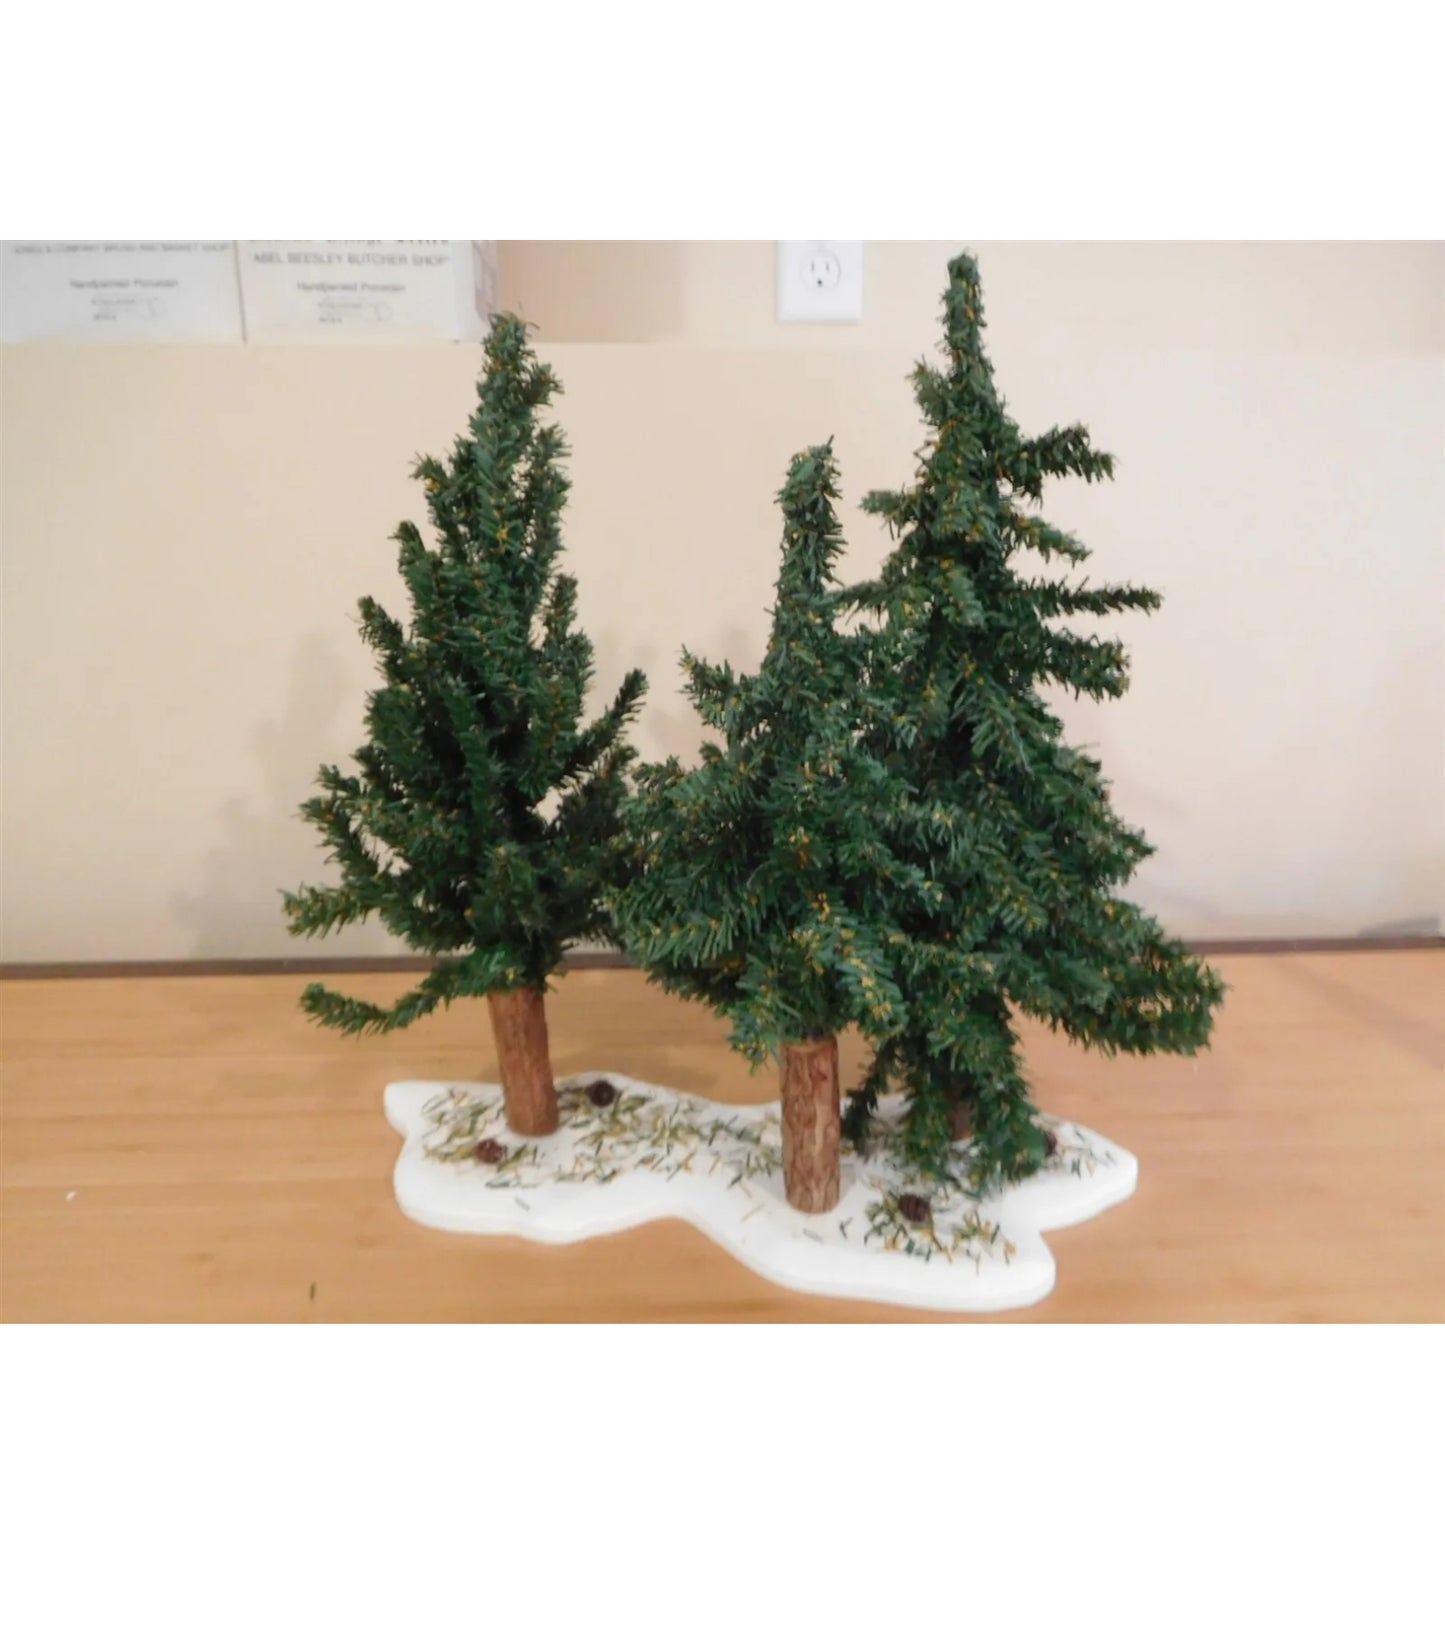 Department 56 - Village Accessories - Spruce Tree Forest (Set of 3)